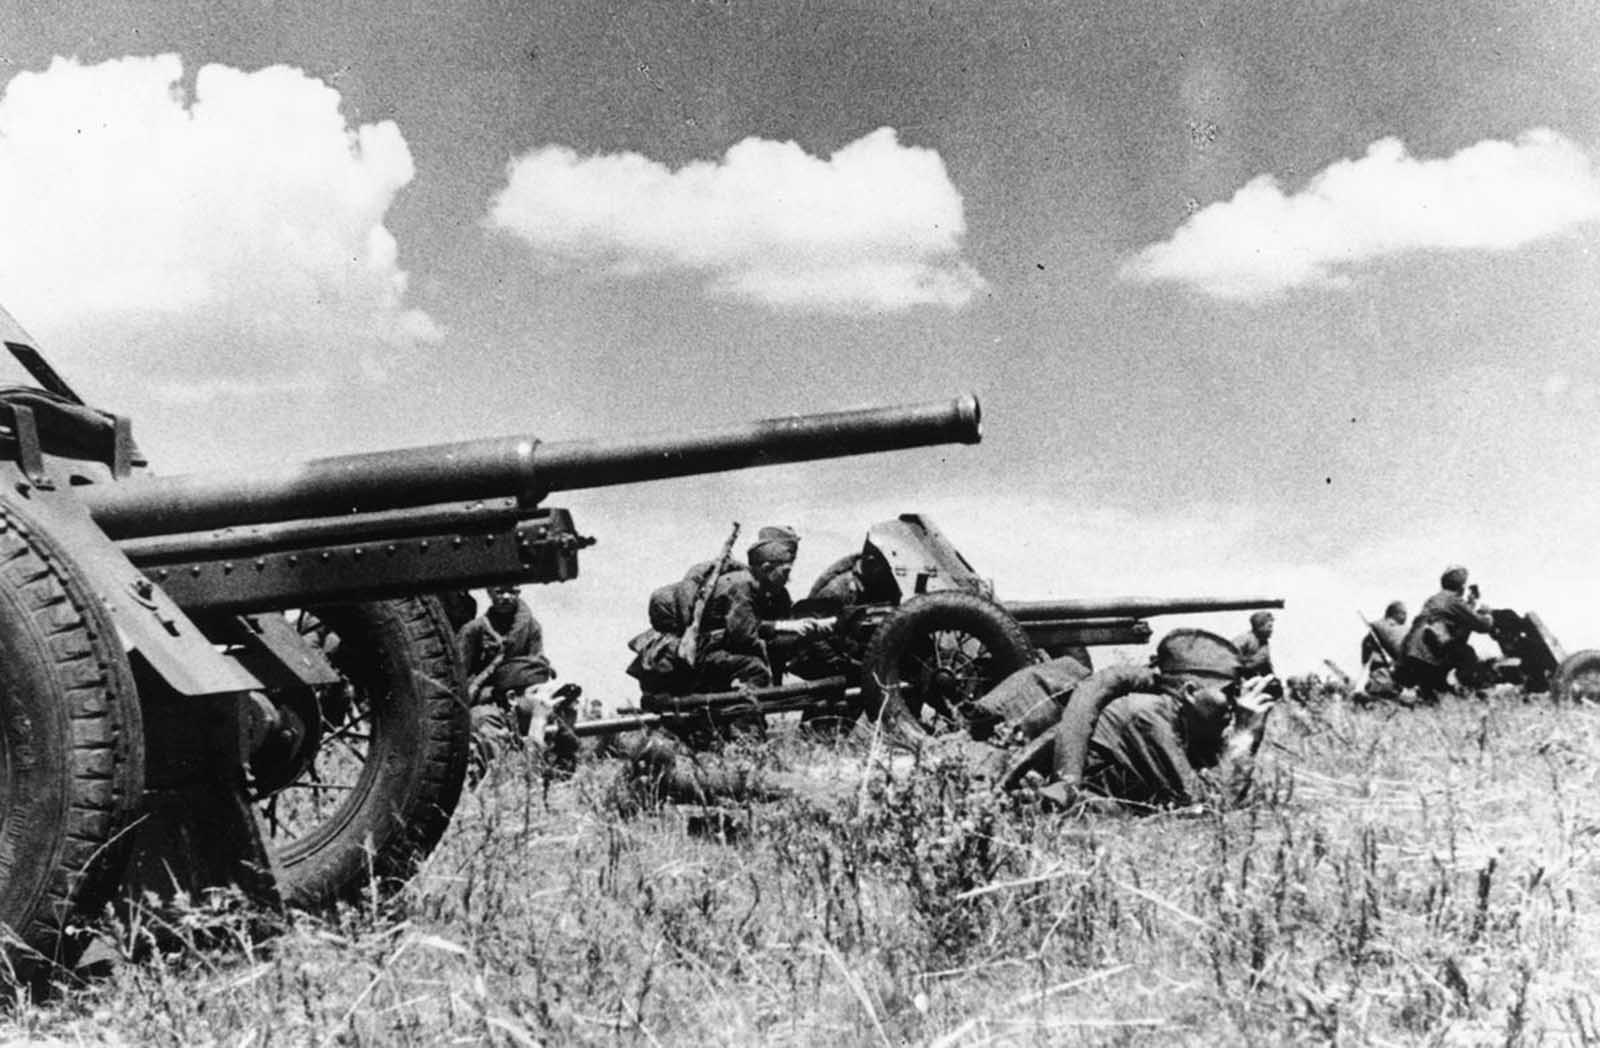 Antitank gun crews of the Red Army prepare to fire against approaching German tank units, on an unknown battlefield, on October 13, 1942, during the German invasion of the Soviet Union.